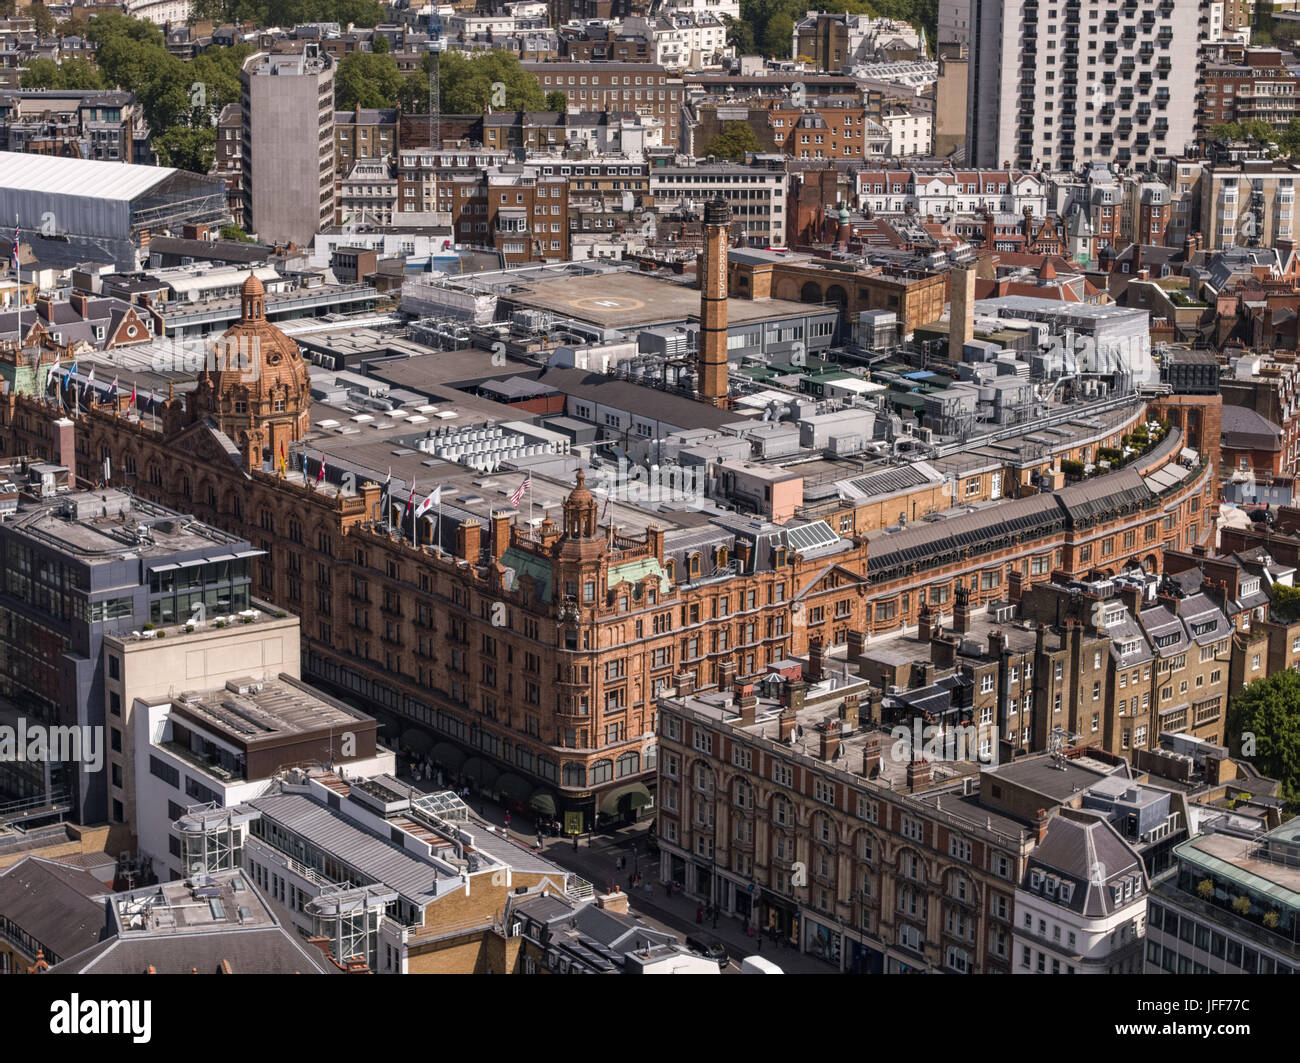 Aerial view over London England including Harrods Store. Harrods is a luxury department store located on Brompton Road in Knightsbridge, London. It is Stock Photo